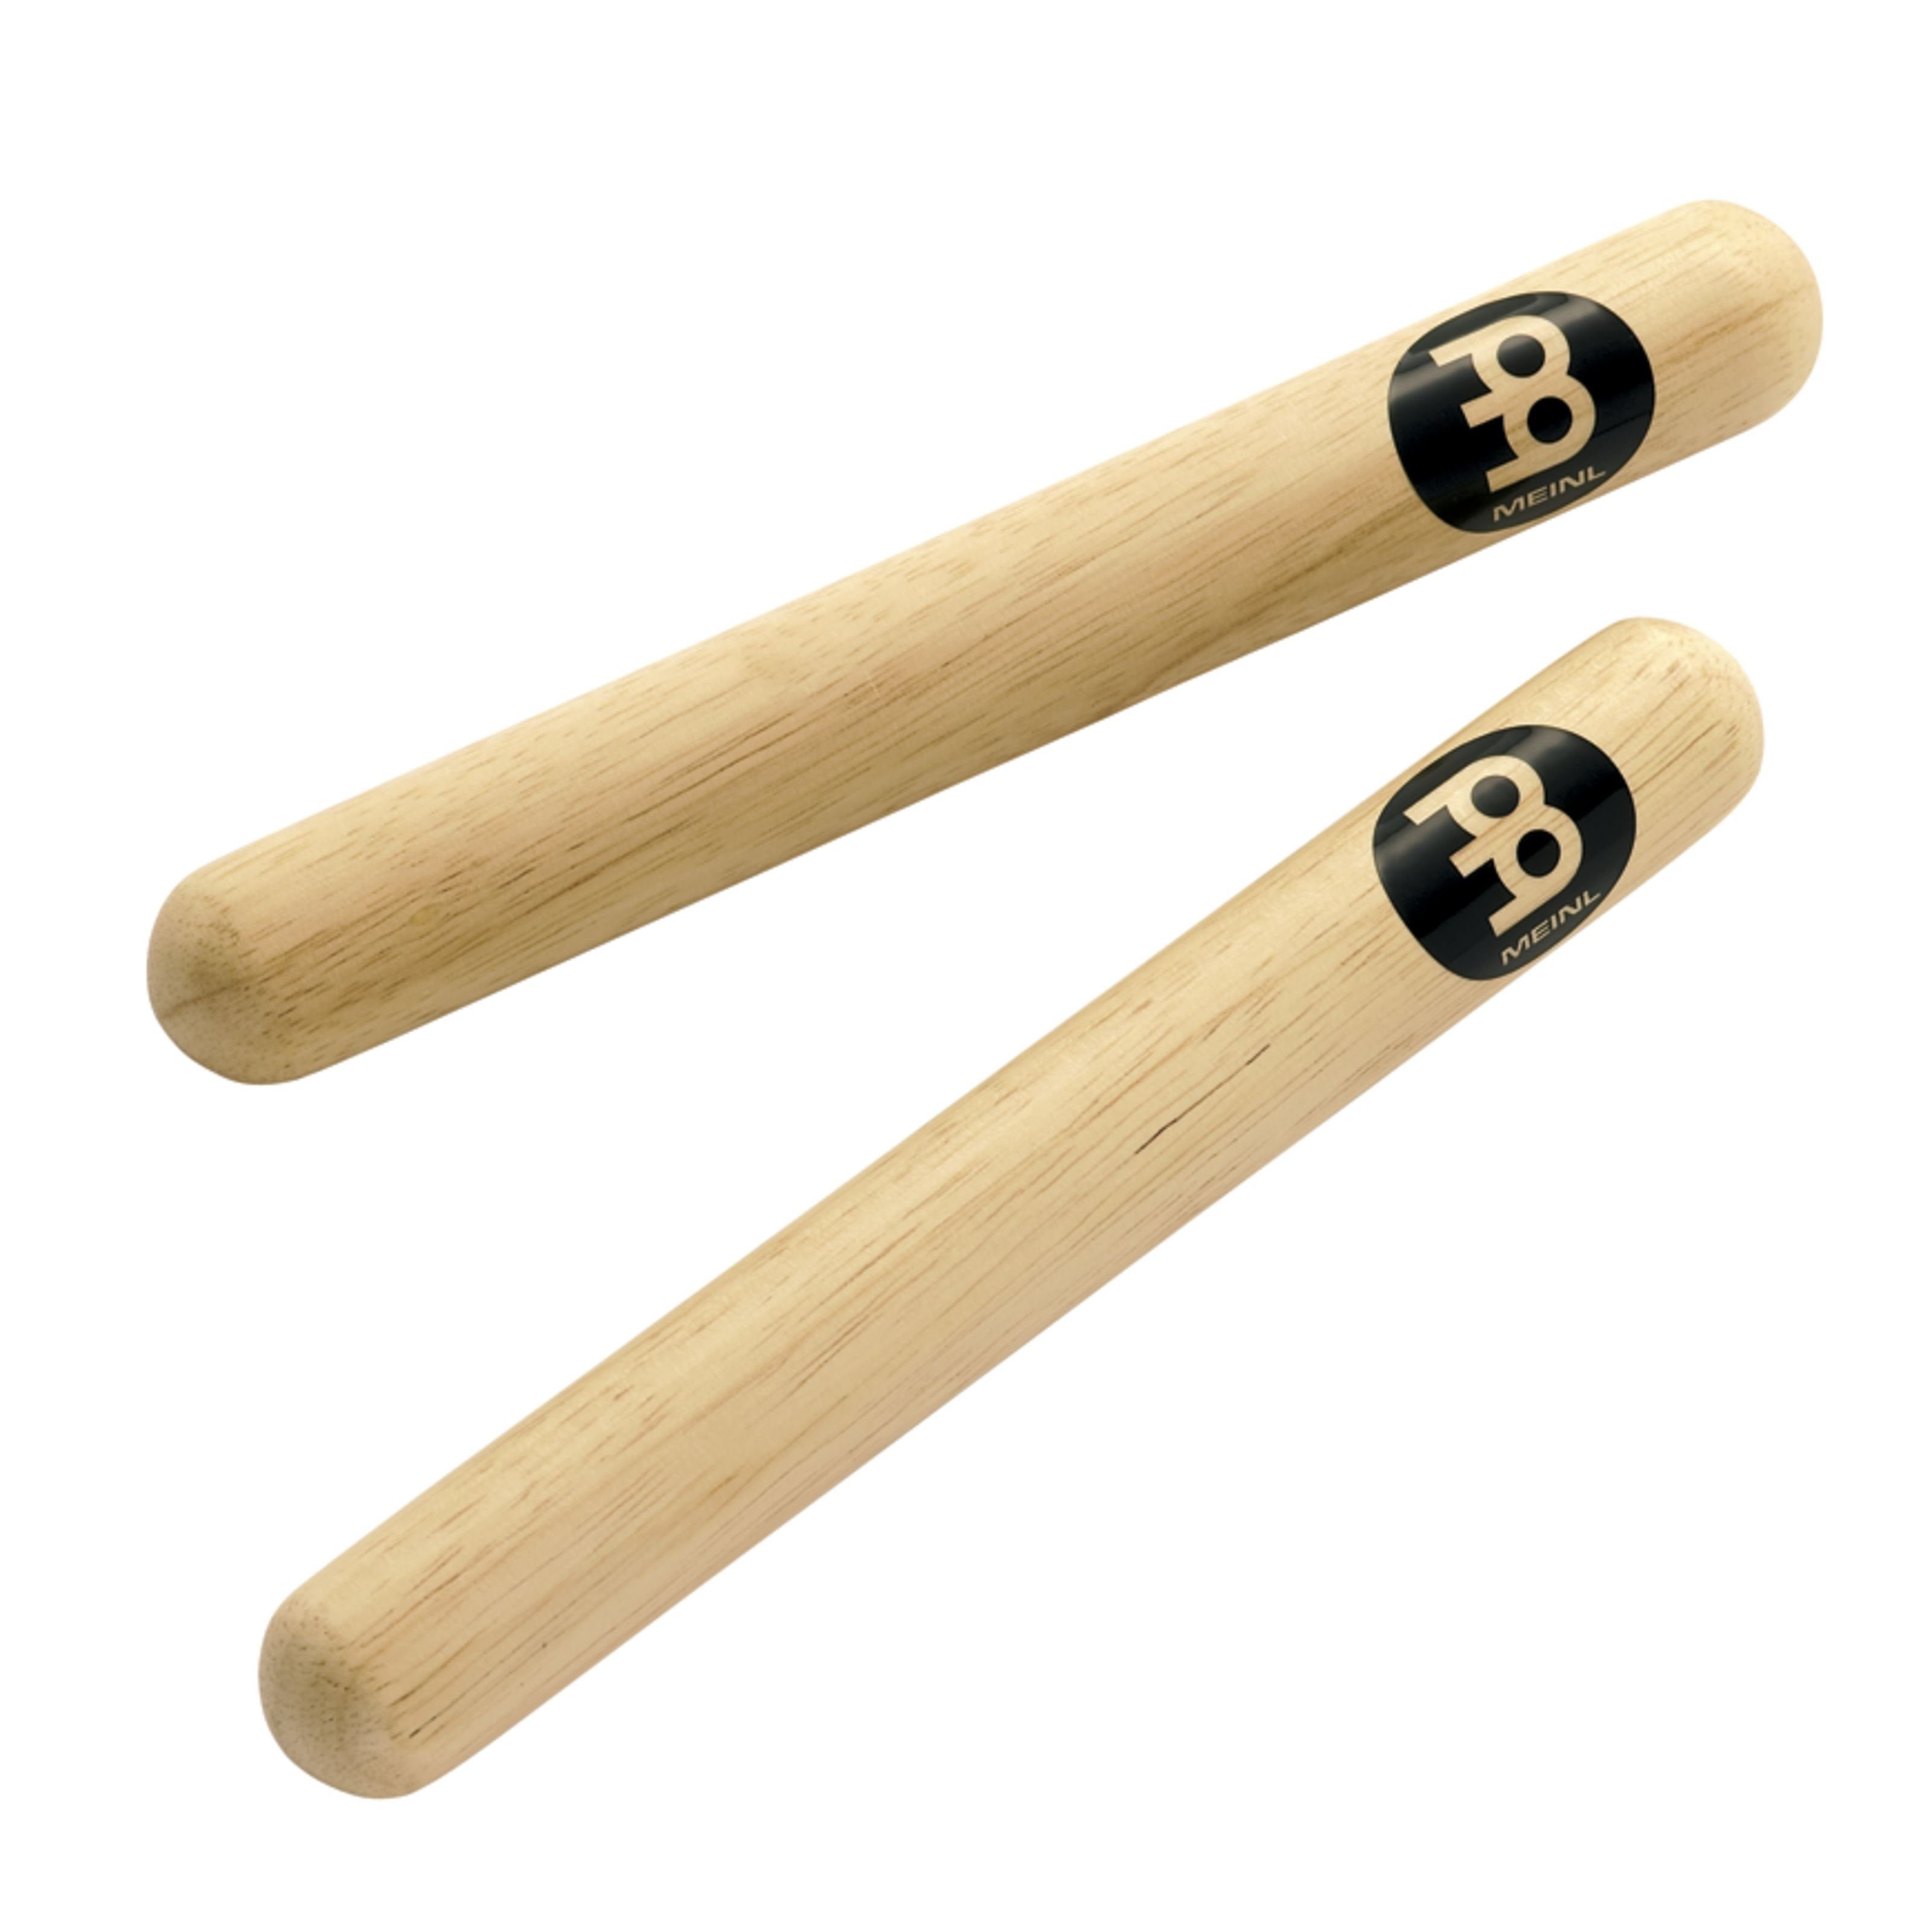 Hardwood - Percussion Meinl Claves Claves Spielzeug-Musikinstrument, CL1HW